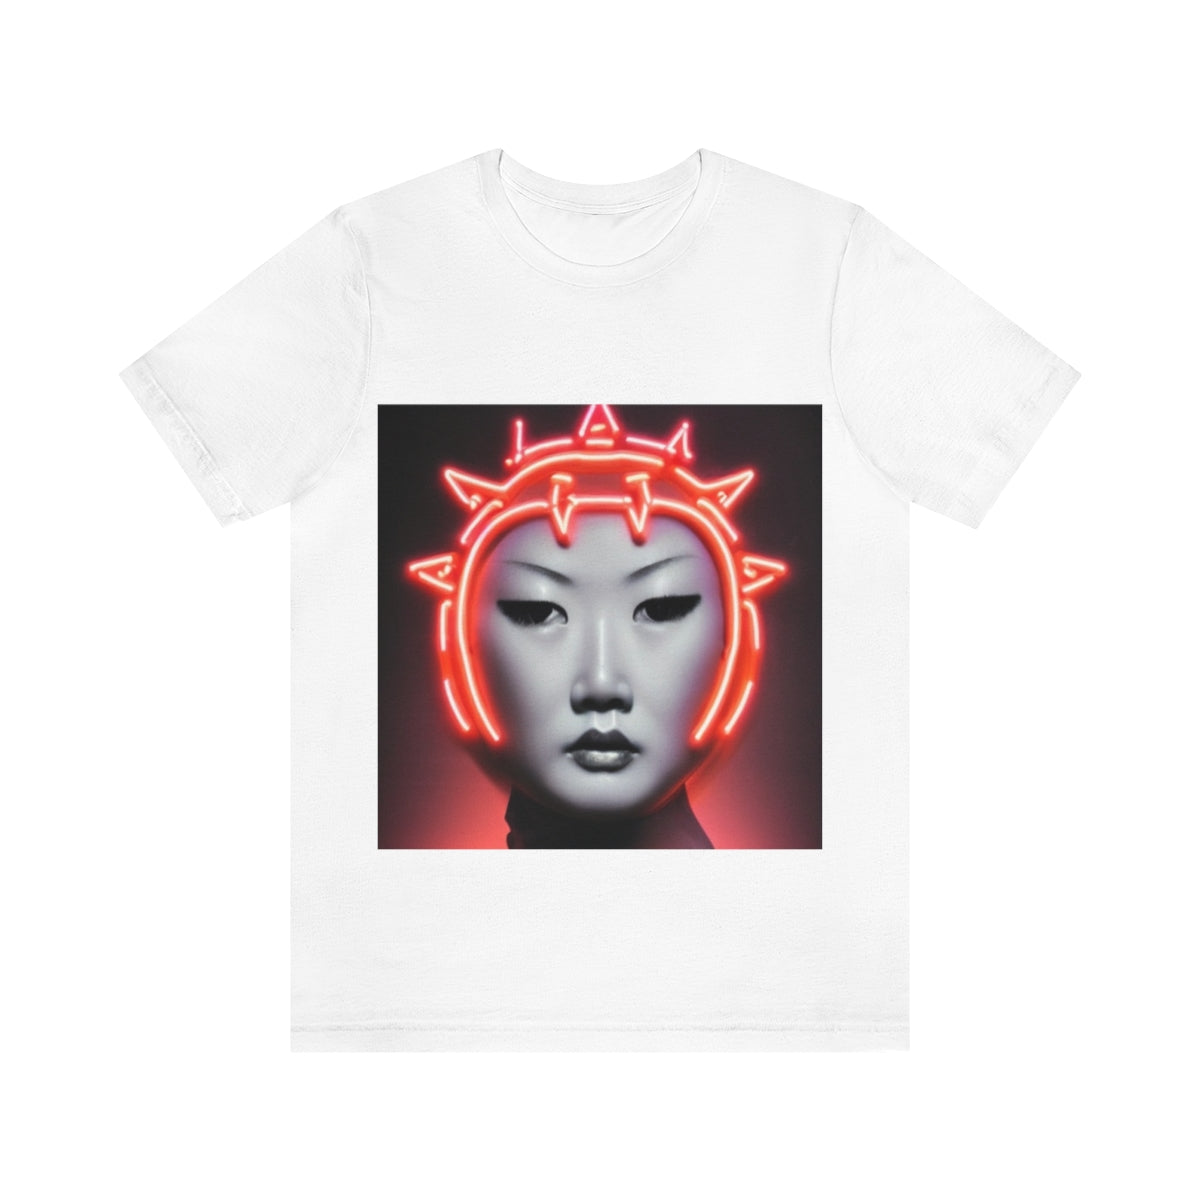 Innocently Sad_Mask Our Emotions T-Shirt Collection - DSIV